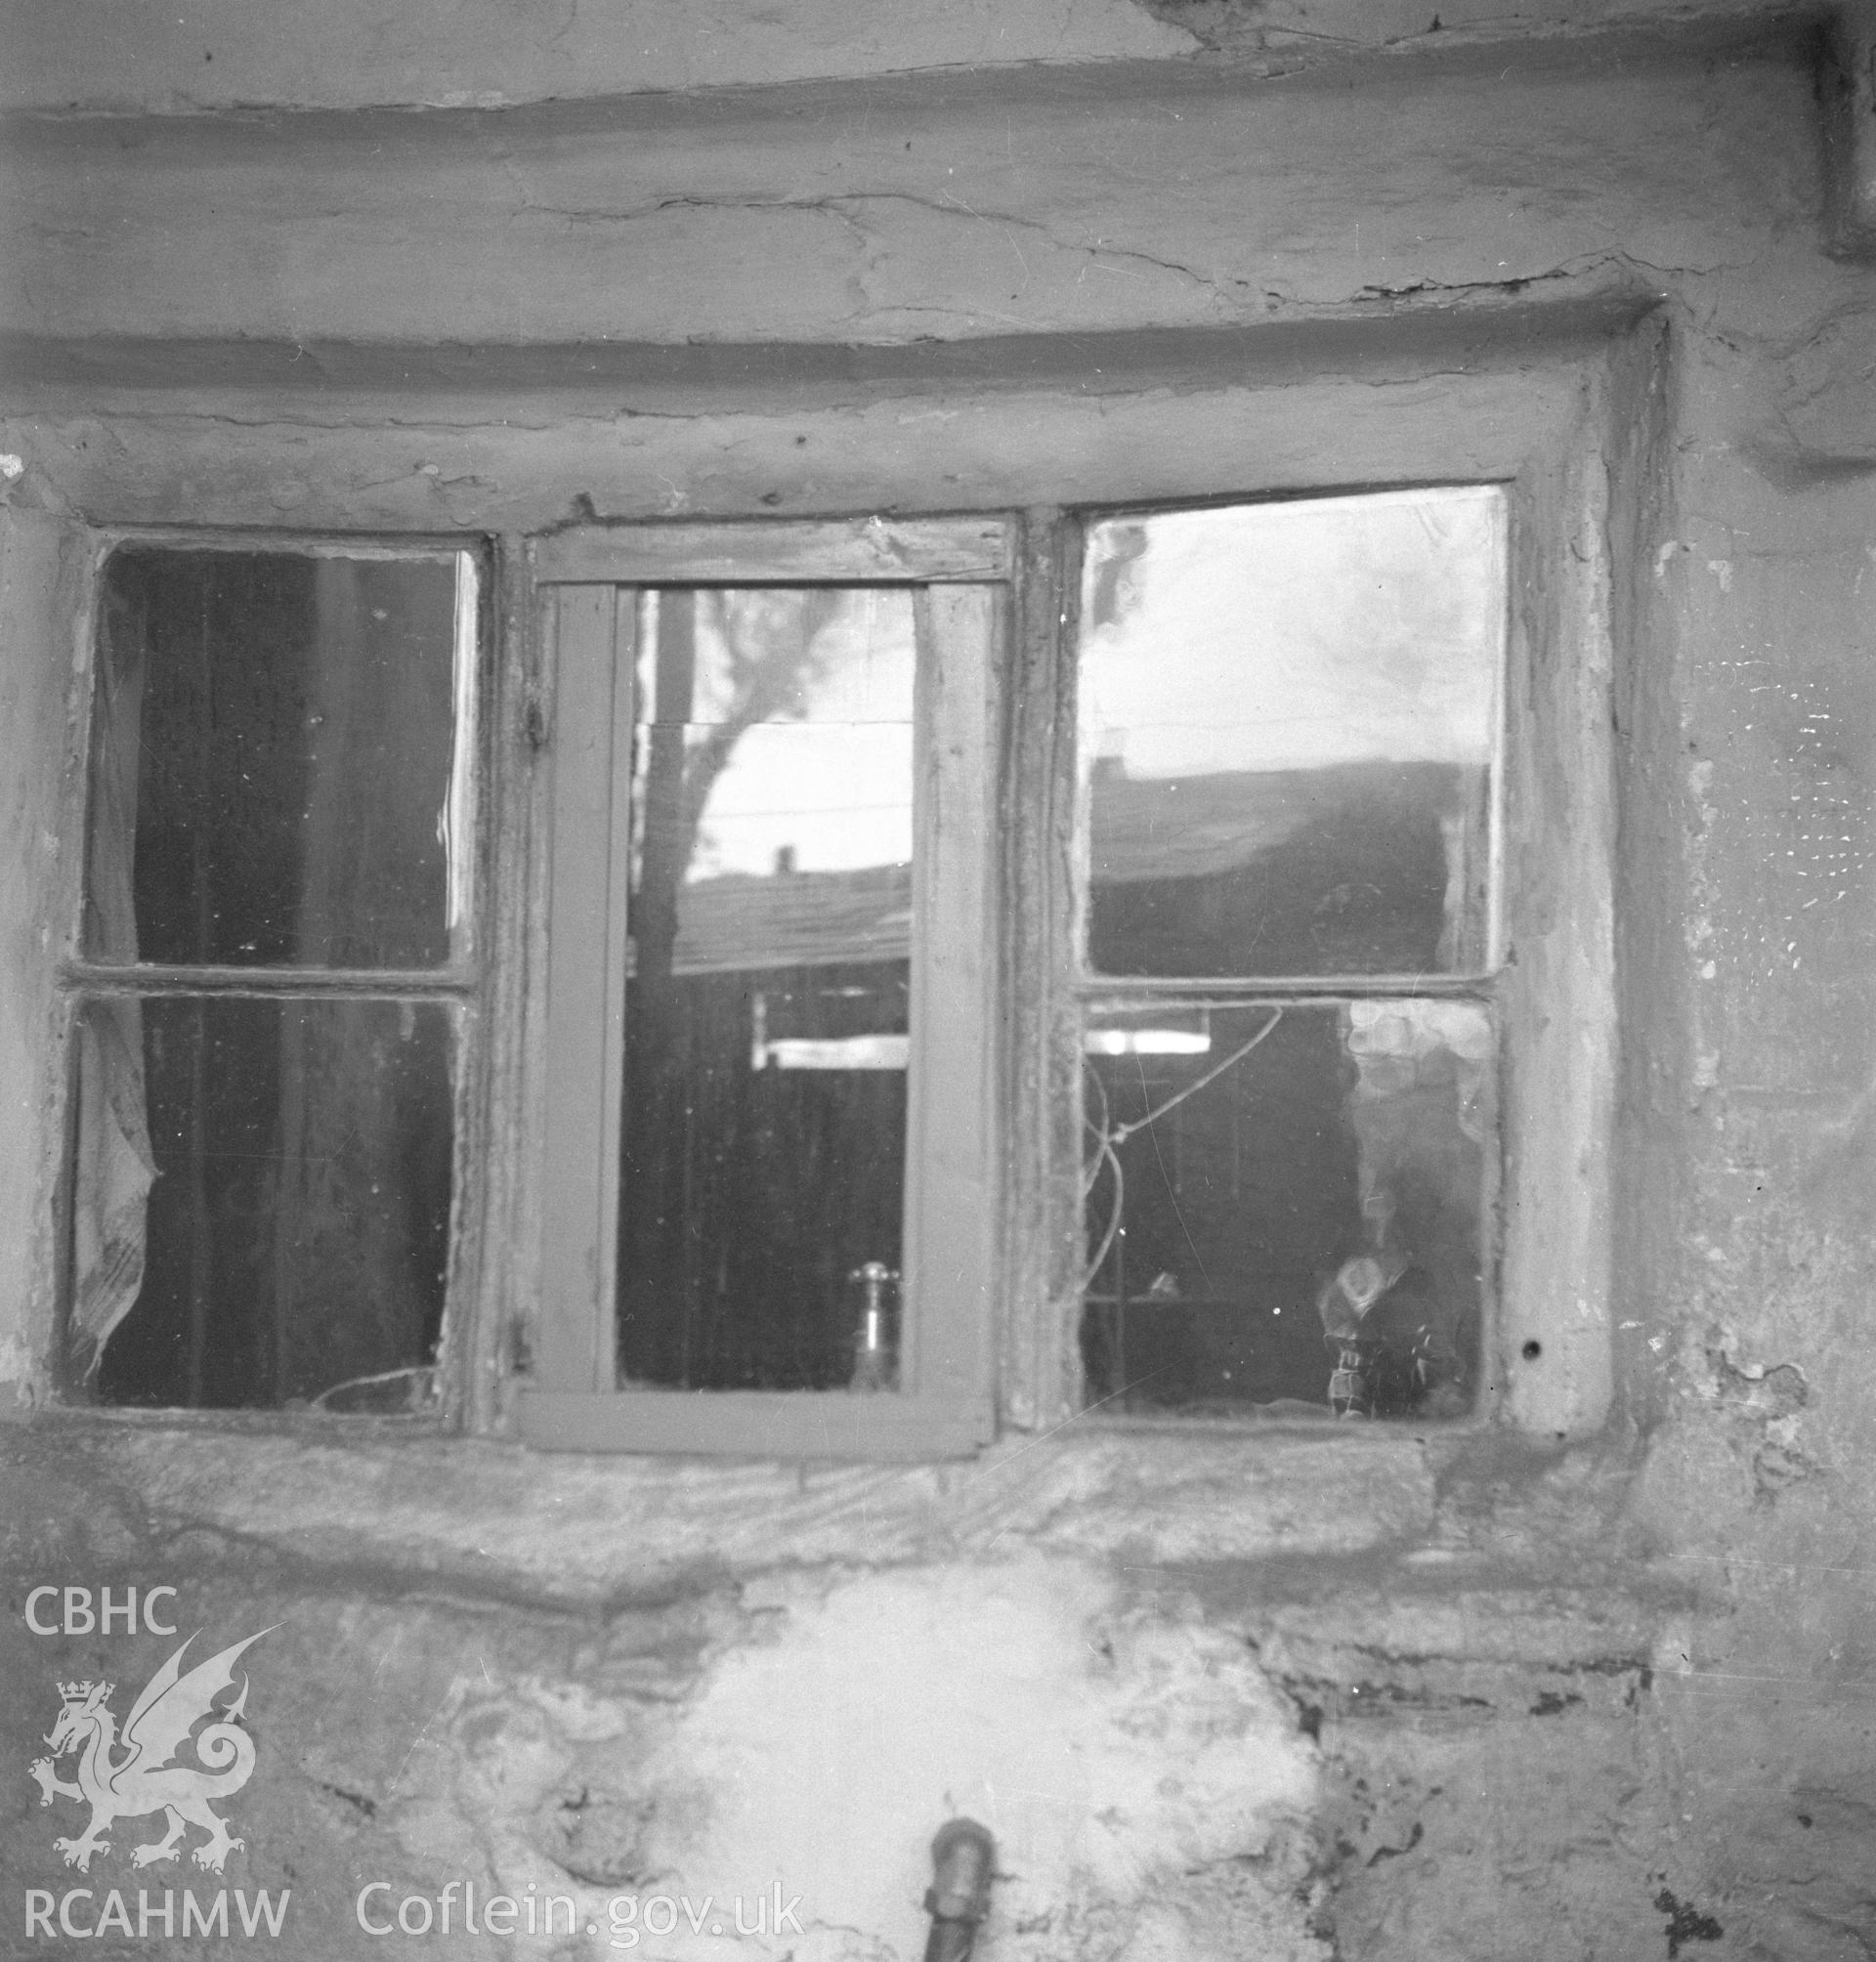 Digital copy of an undated nitrate negative showing window detail at 40 Cross Street,  Abergavenny.